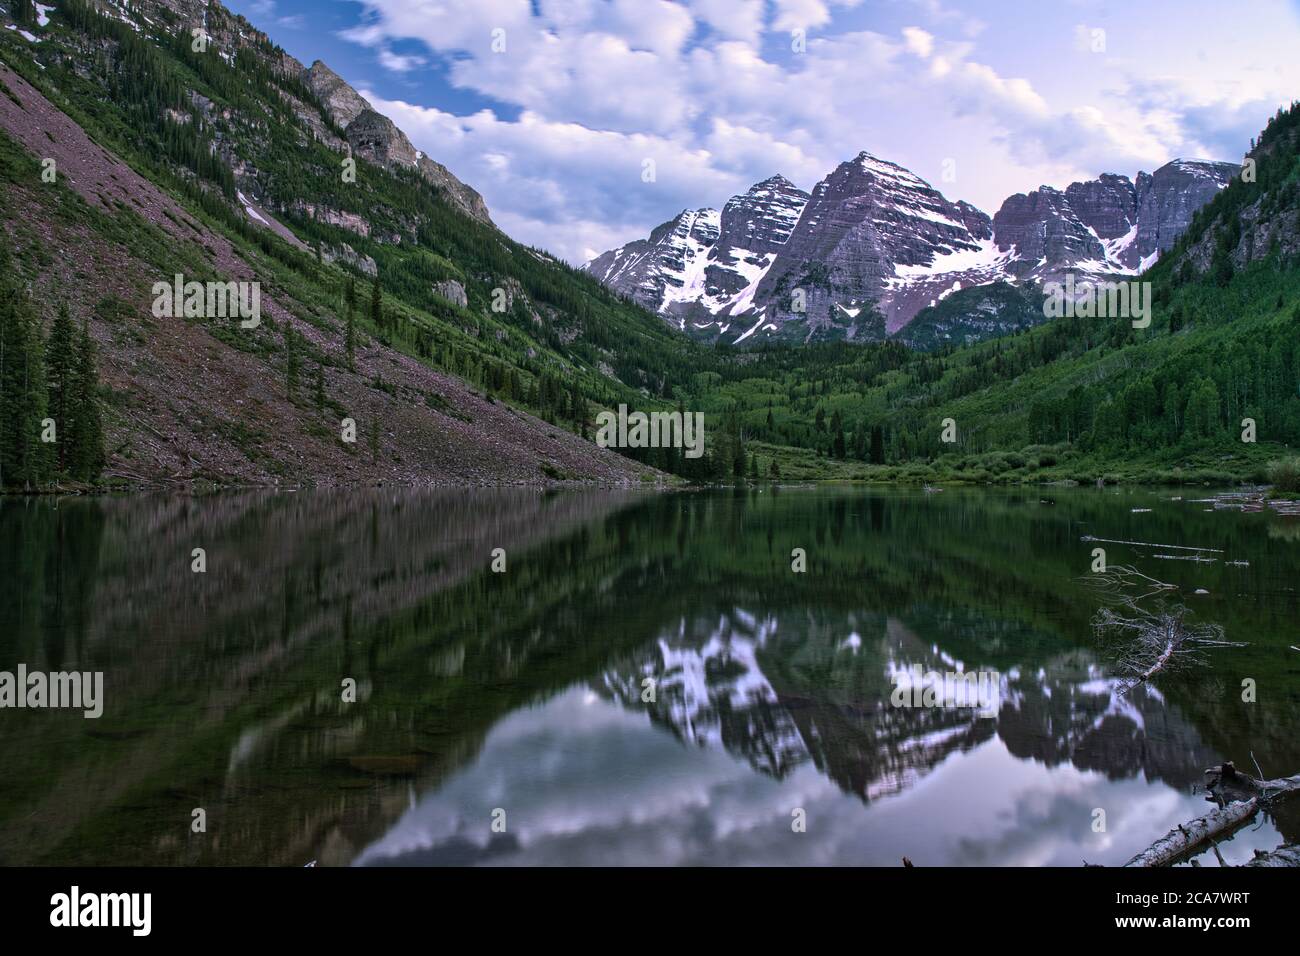 Marroon Bells at sunset. Colorful peaks reflect off glassy smooth water. Hillside leads towards the mountain showing the immense size of the snow cres Stock Photo